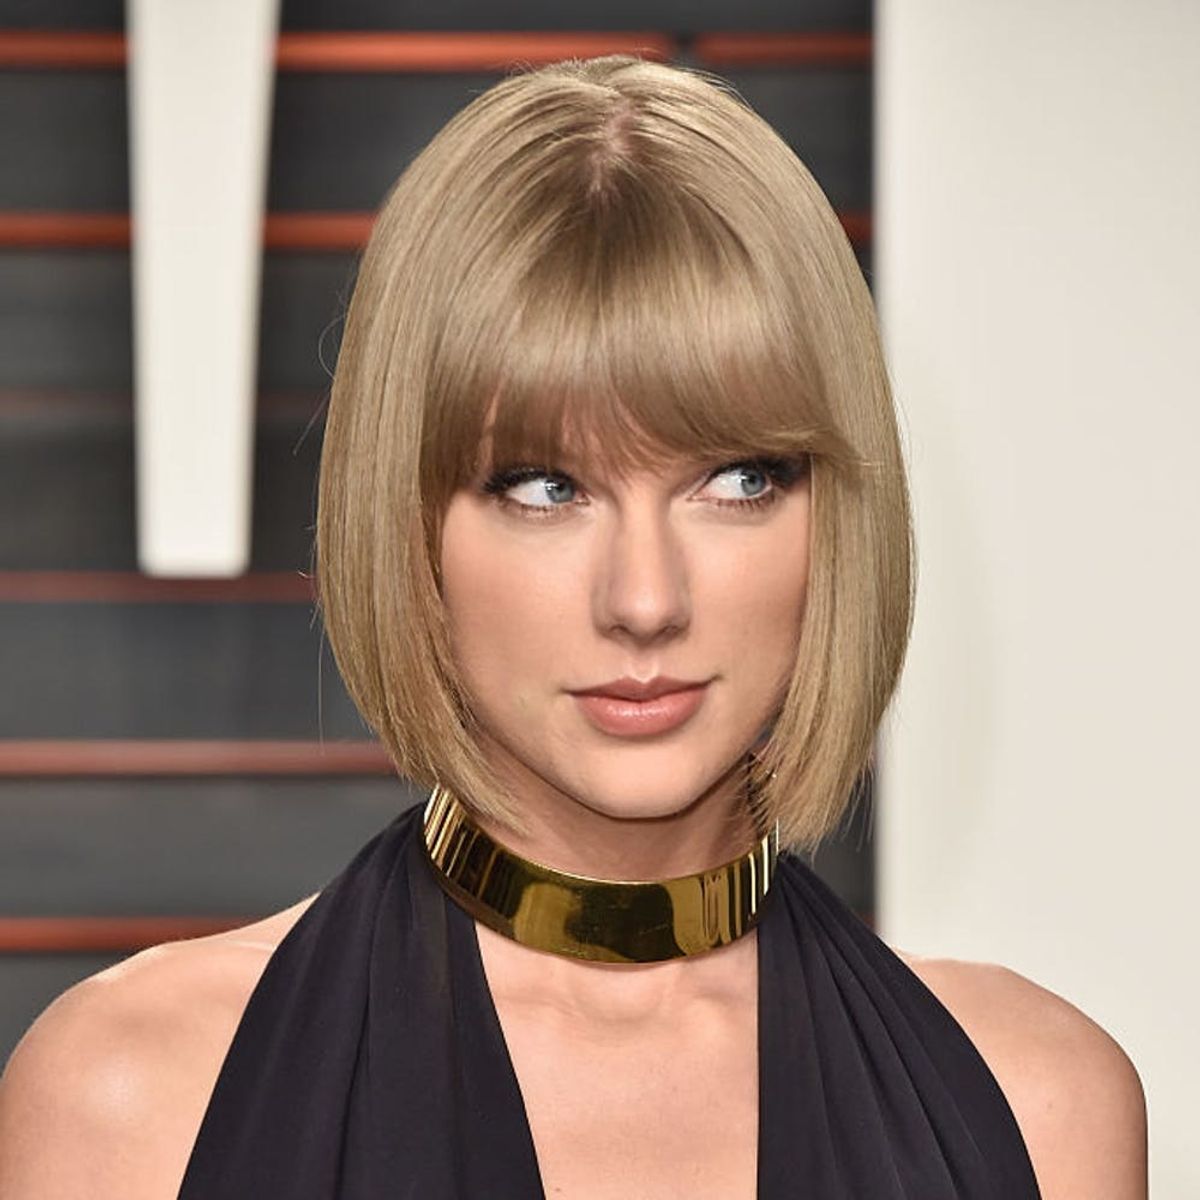 Taylor Swift’s Latest Apple Music Ad Is Adorkably Perfect